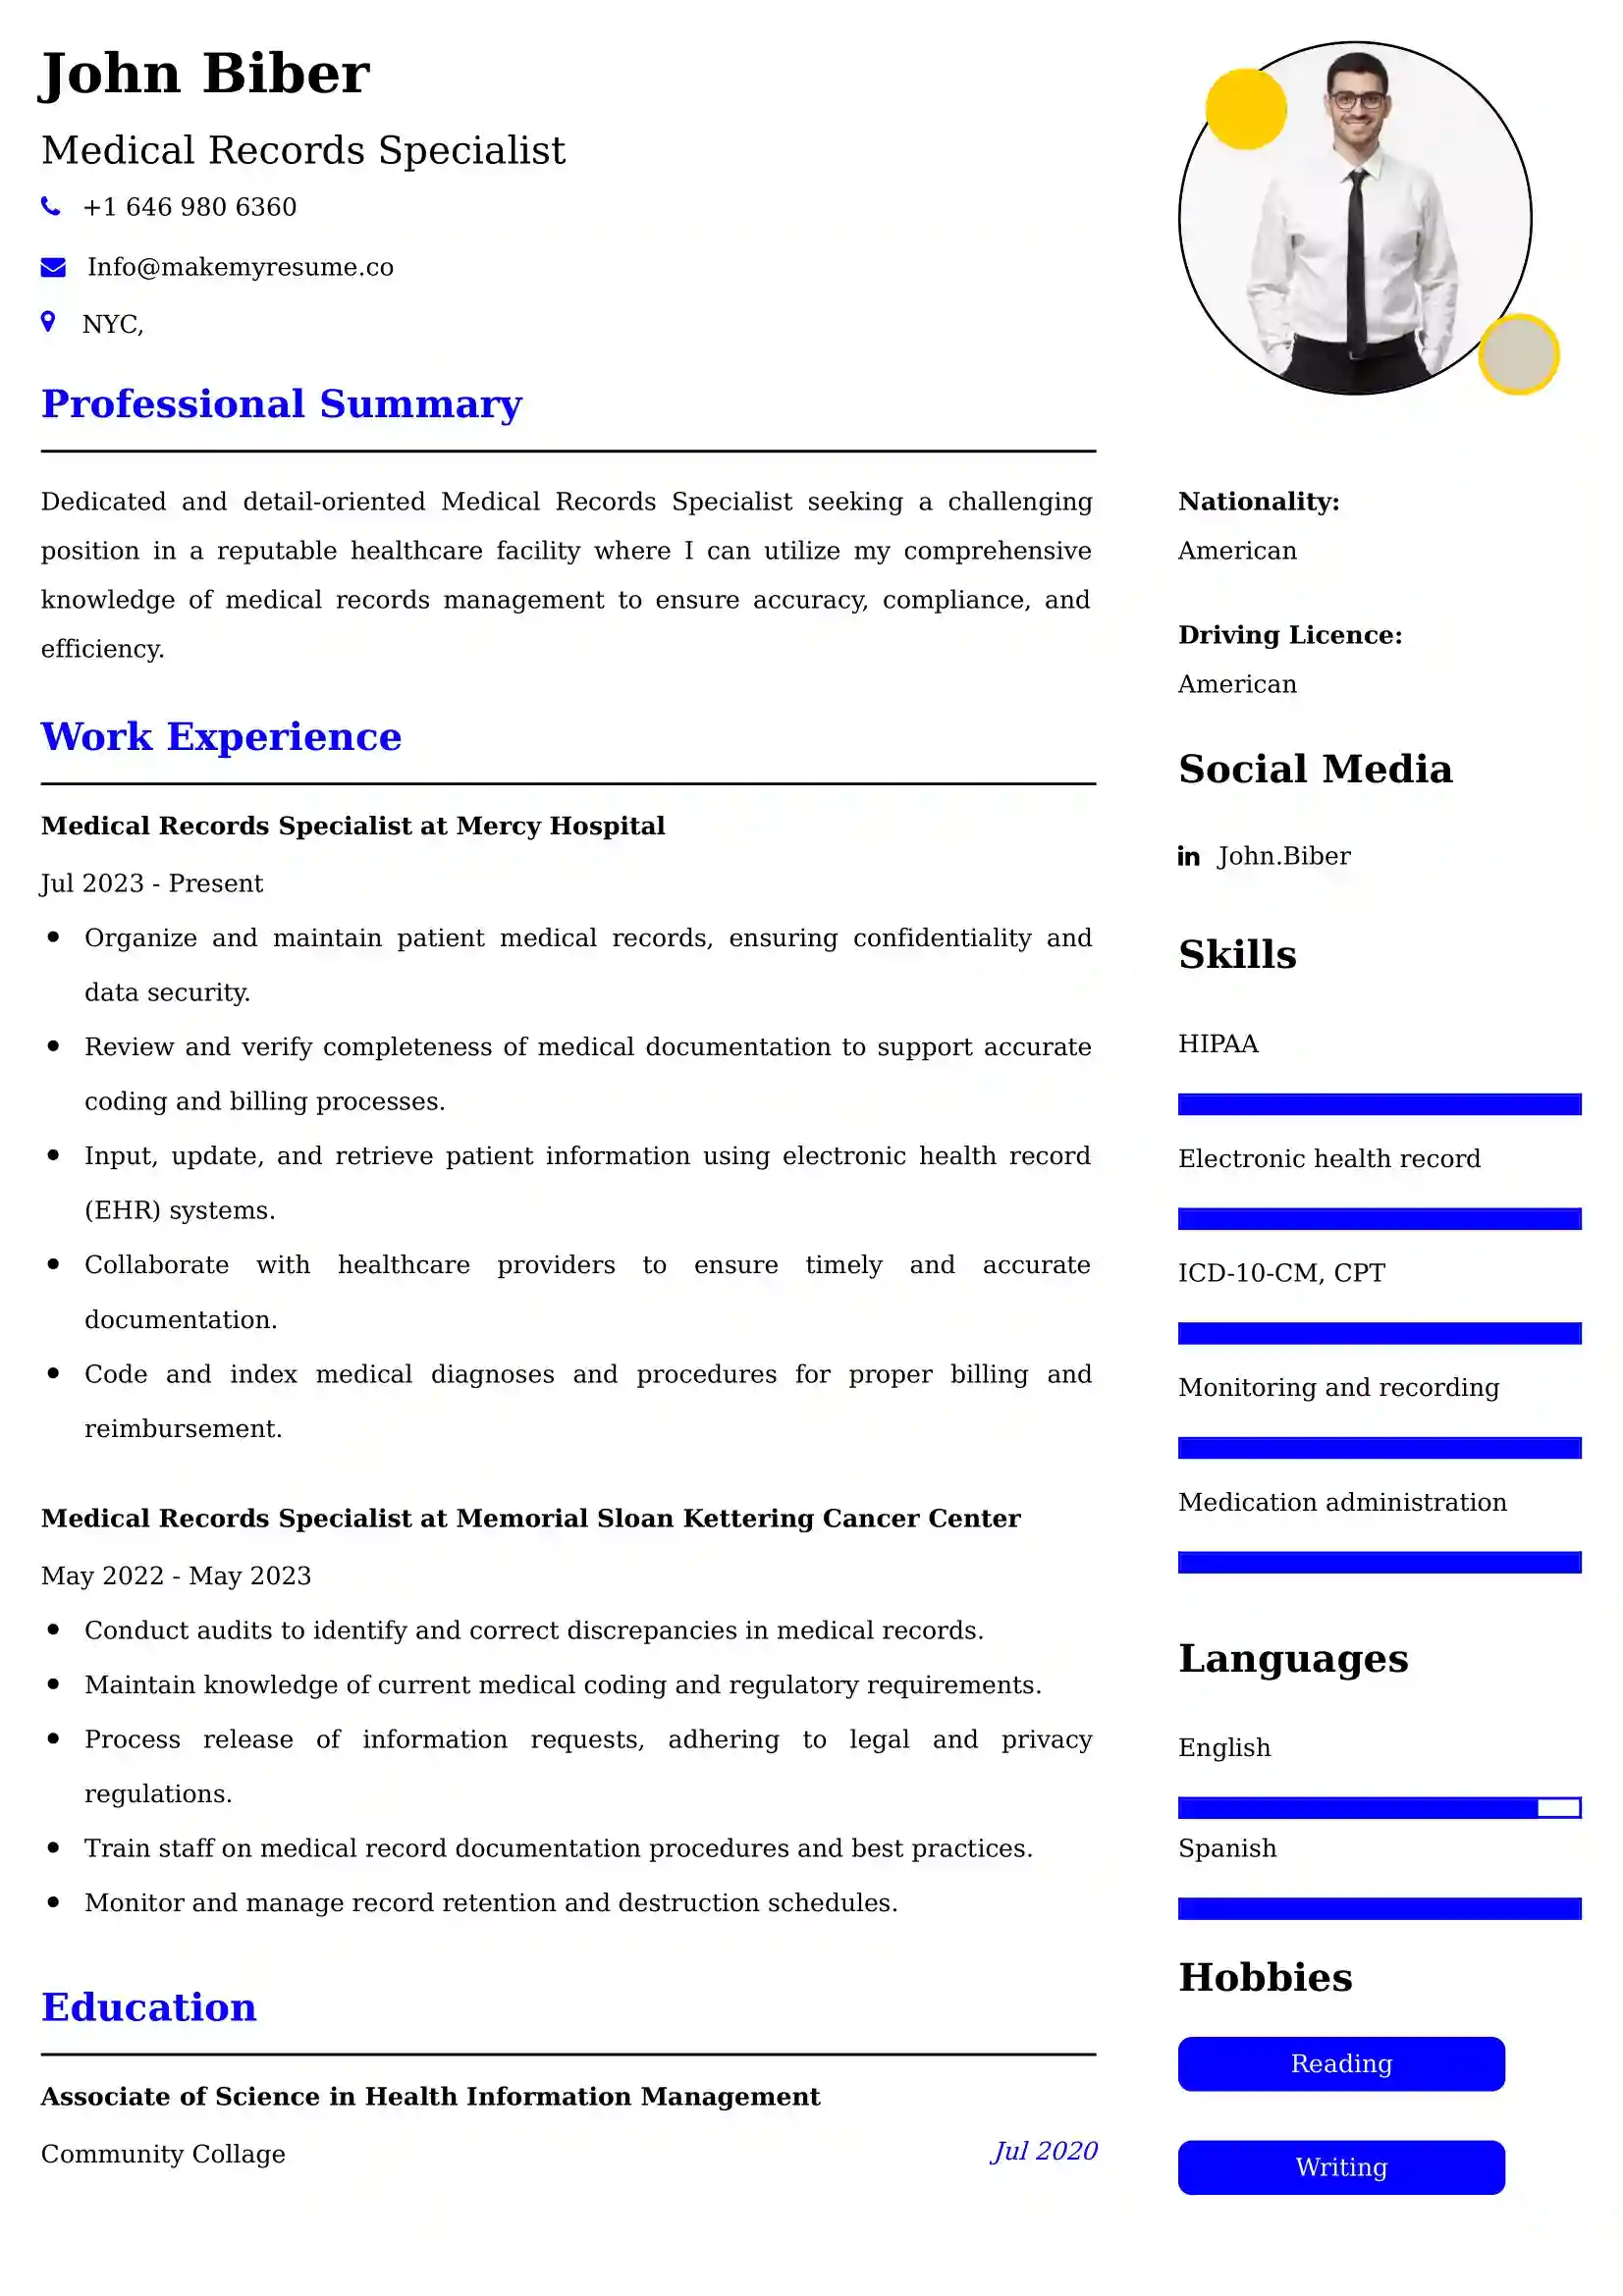 Medical Records Specialist Resume Examples - UK Format, Latest Template.